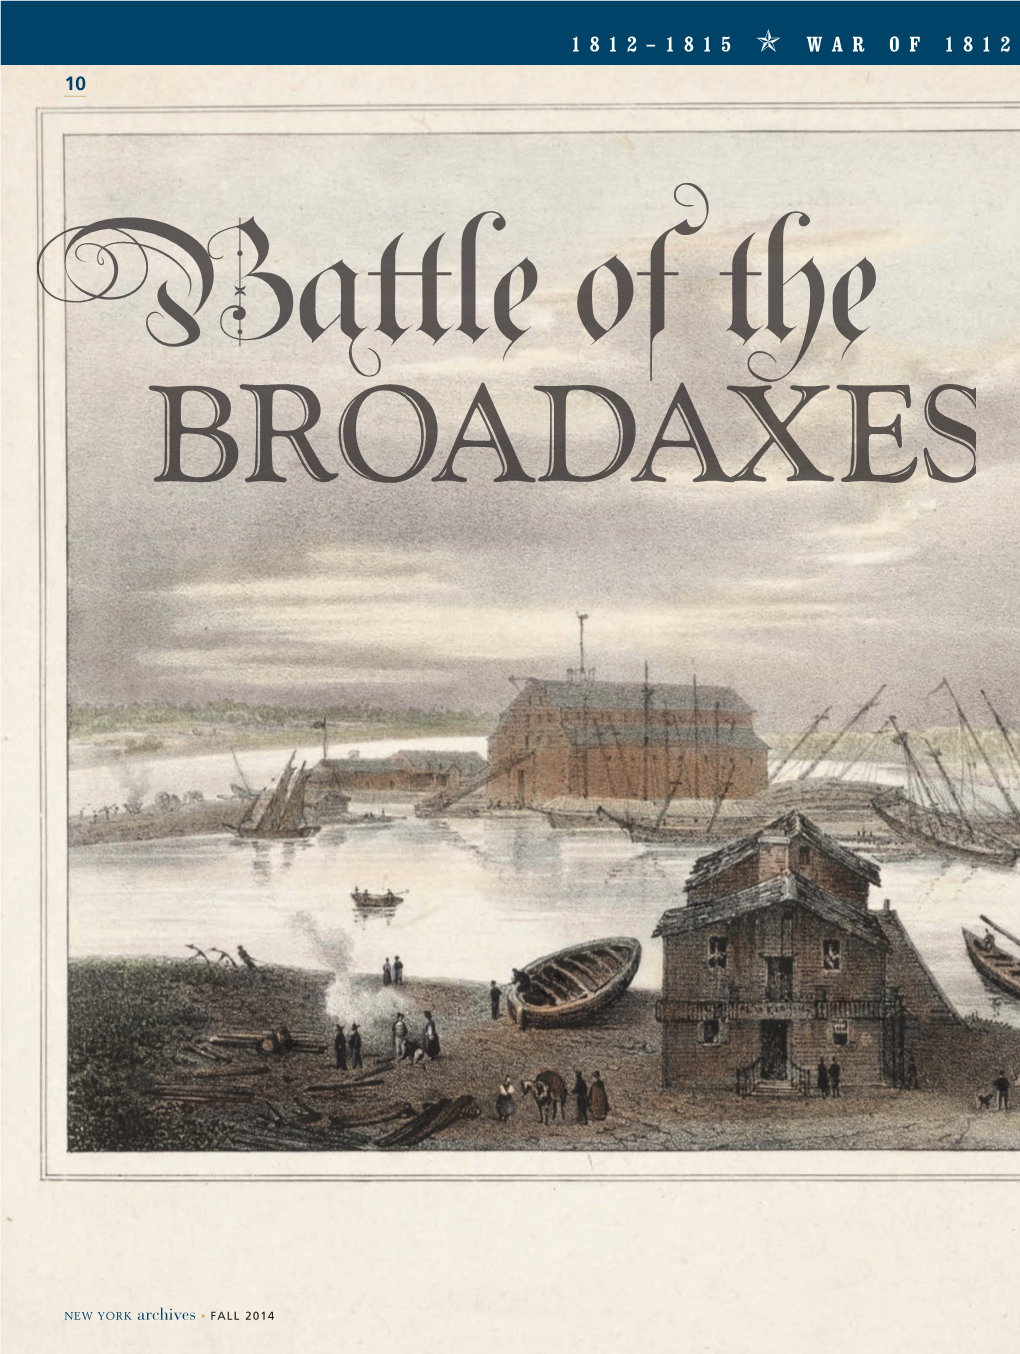 Battle of the BROADAXES